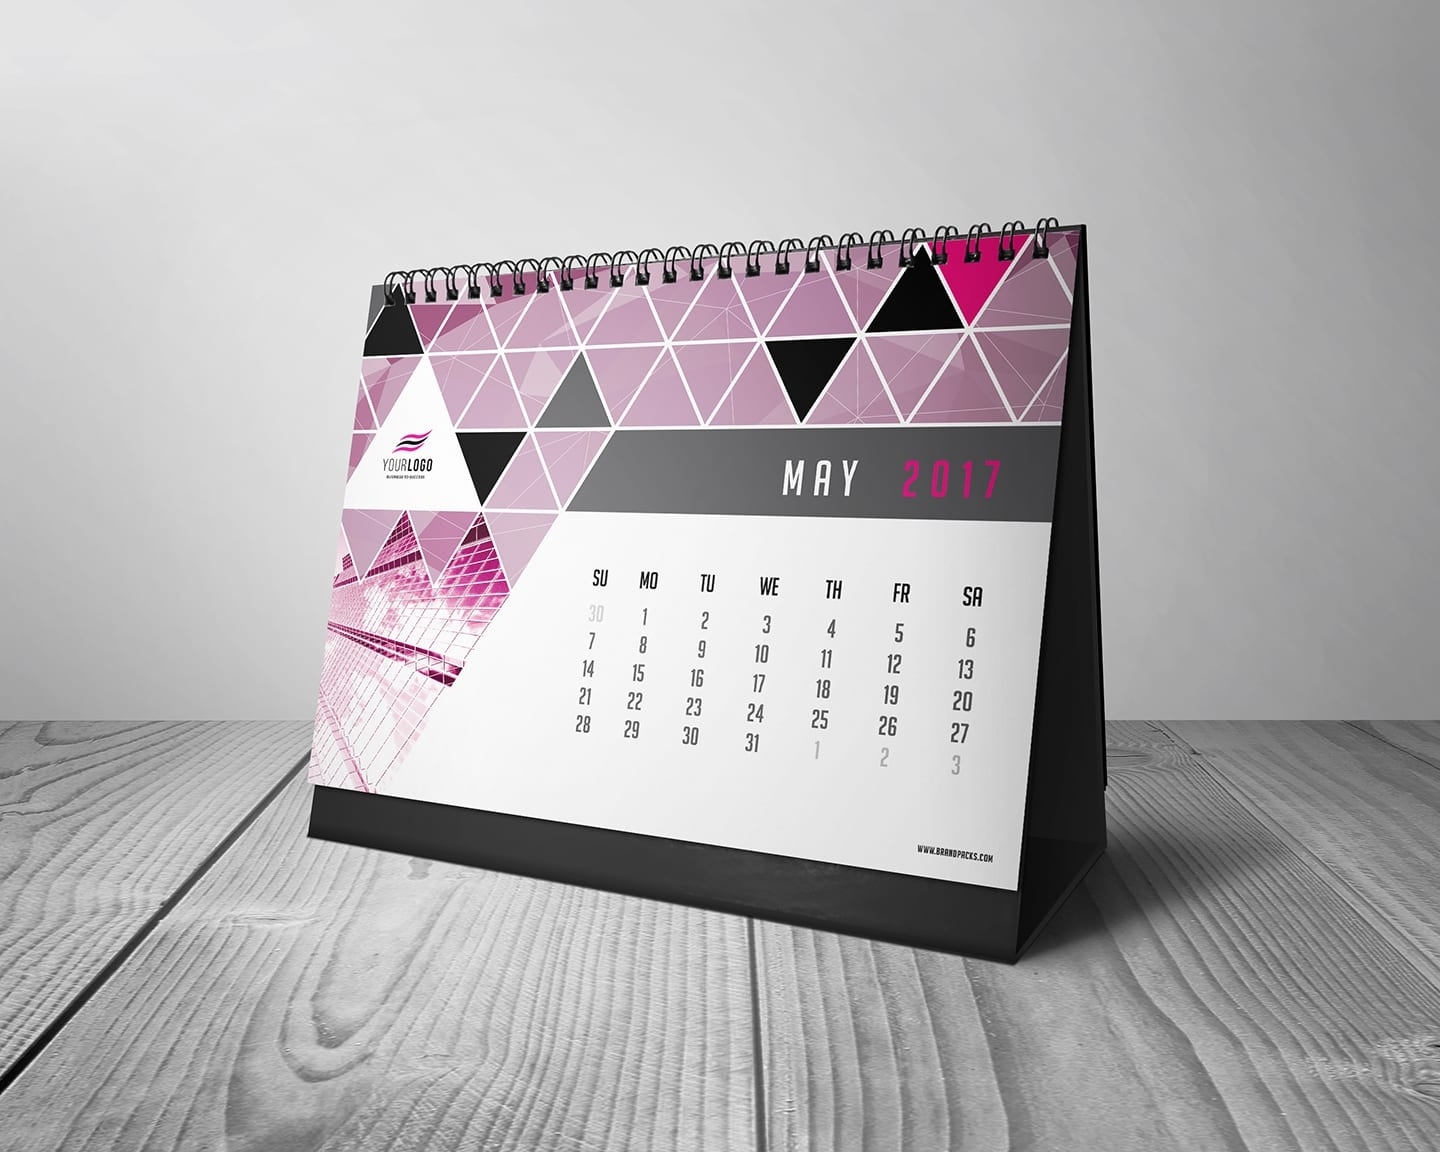 Free Calendar Template For Photoshop &amp; Illustrator - Brandpacks Calendar Template For Photoshop